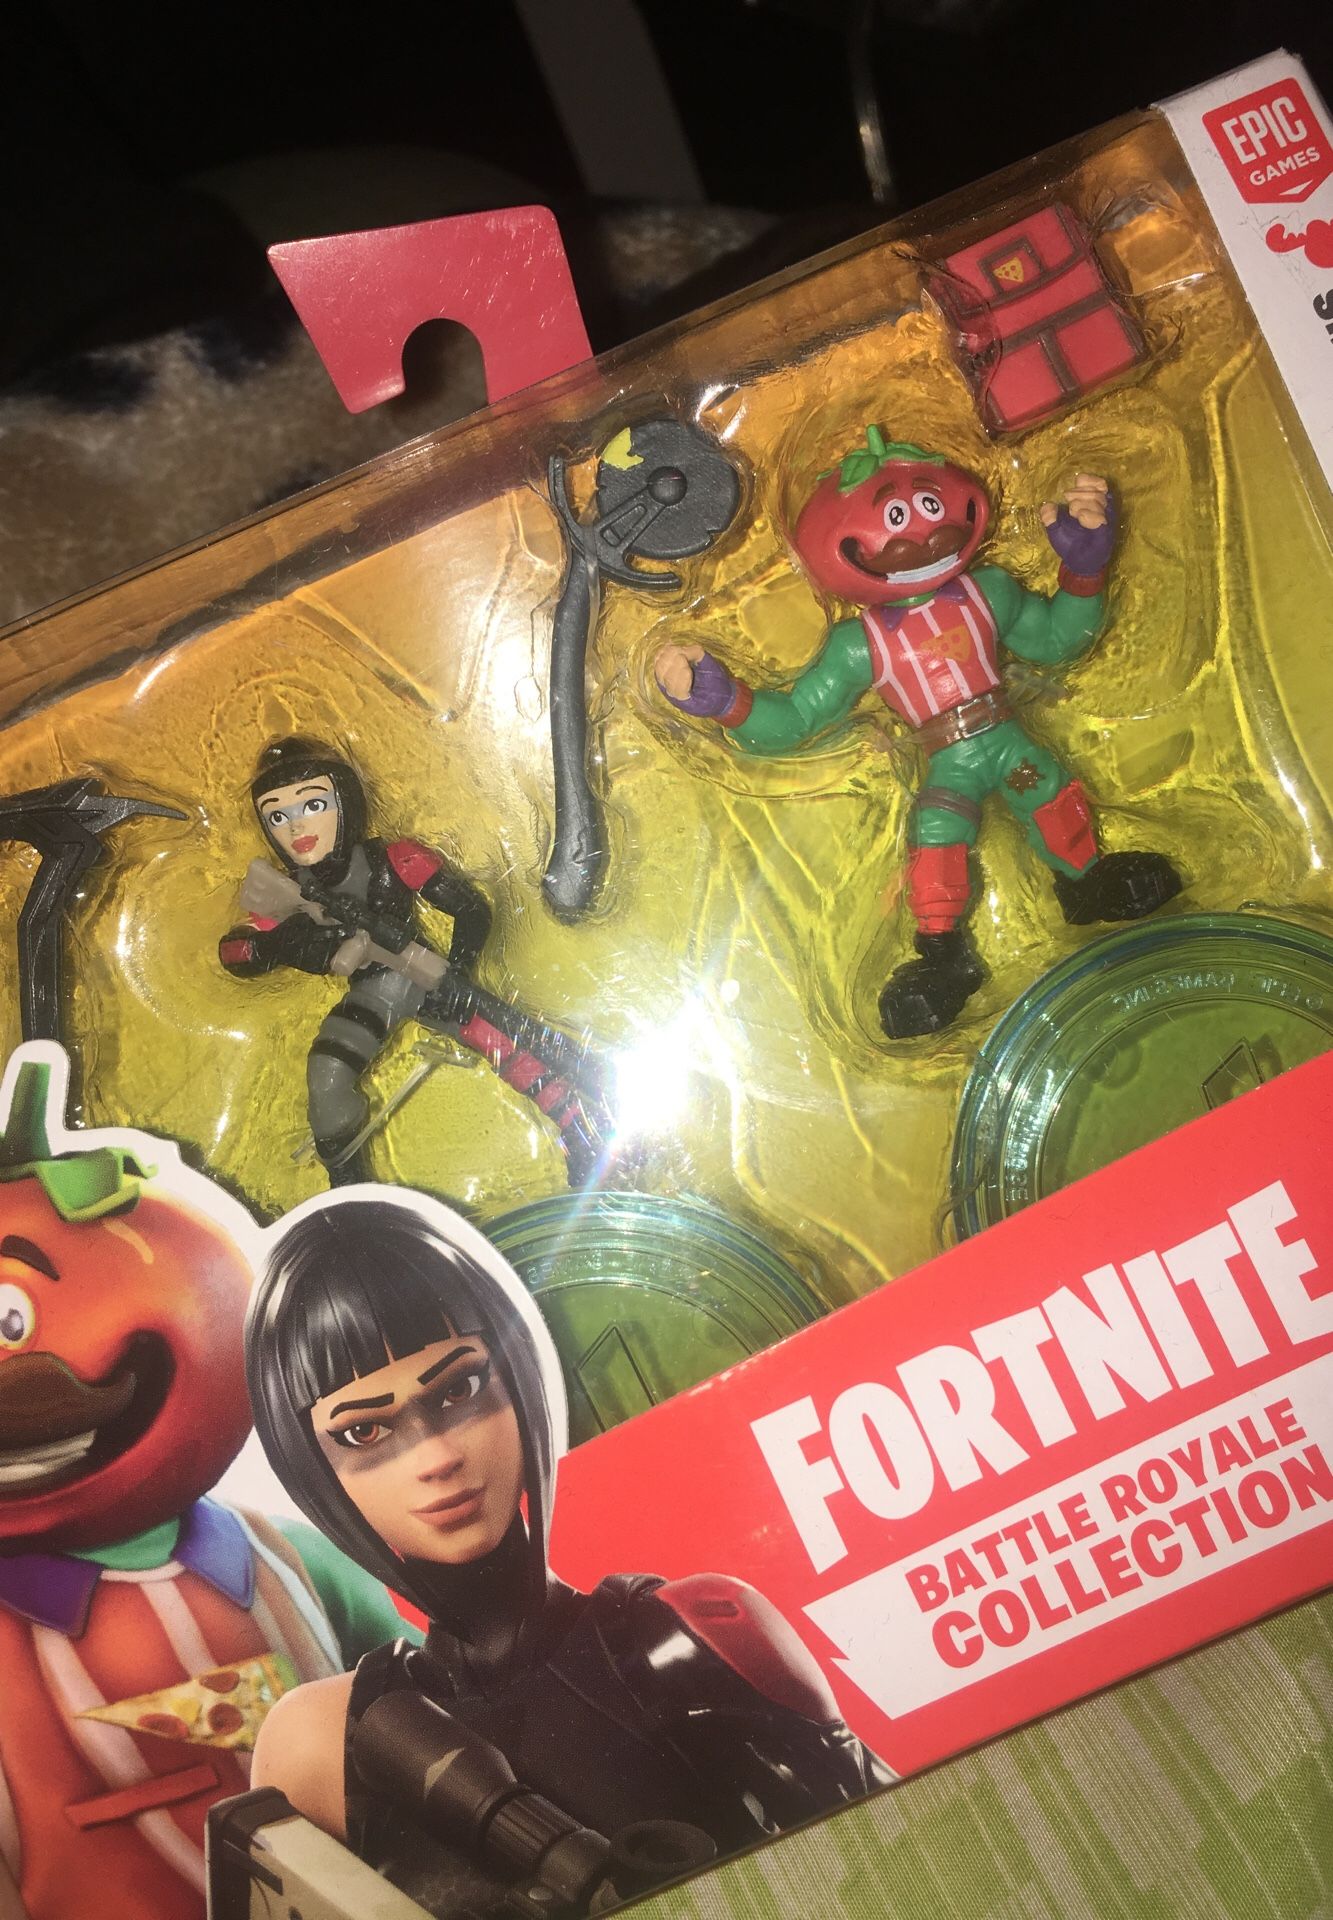 Fortnite toys / collectibles